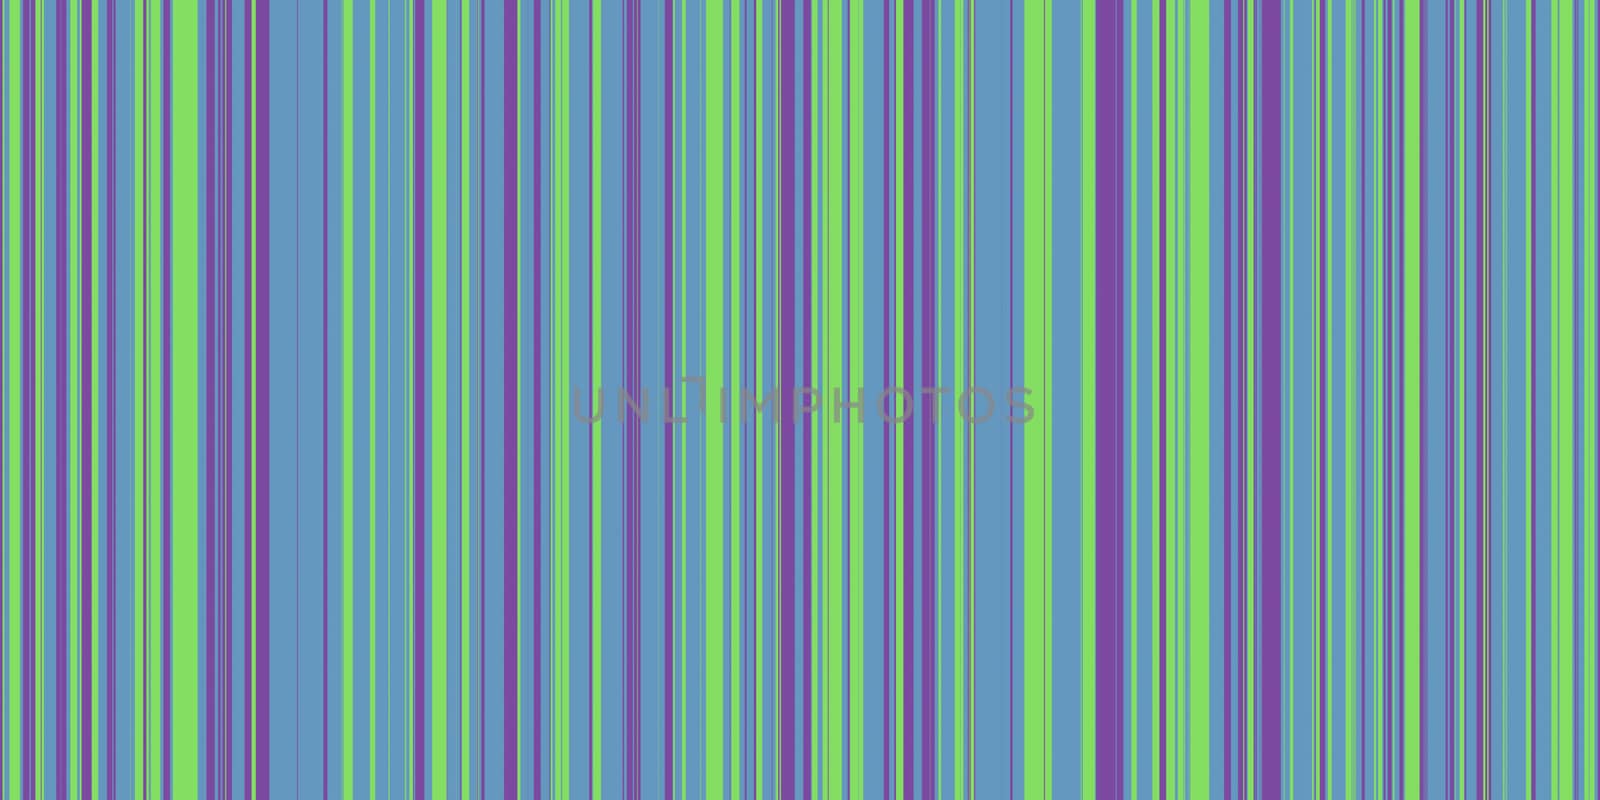 Summer Candy Lines Background. Random Striped Lines Backdrop. Colorful Stripes Texture.